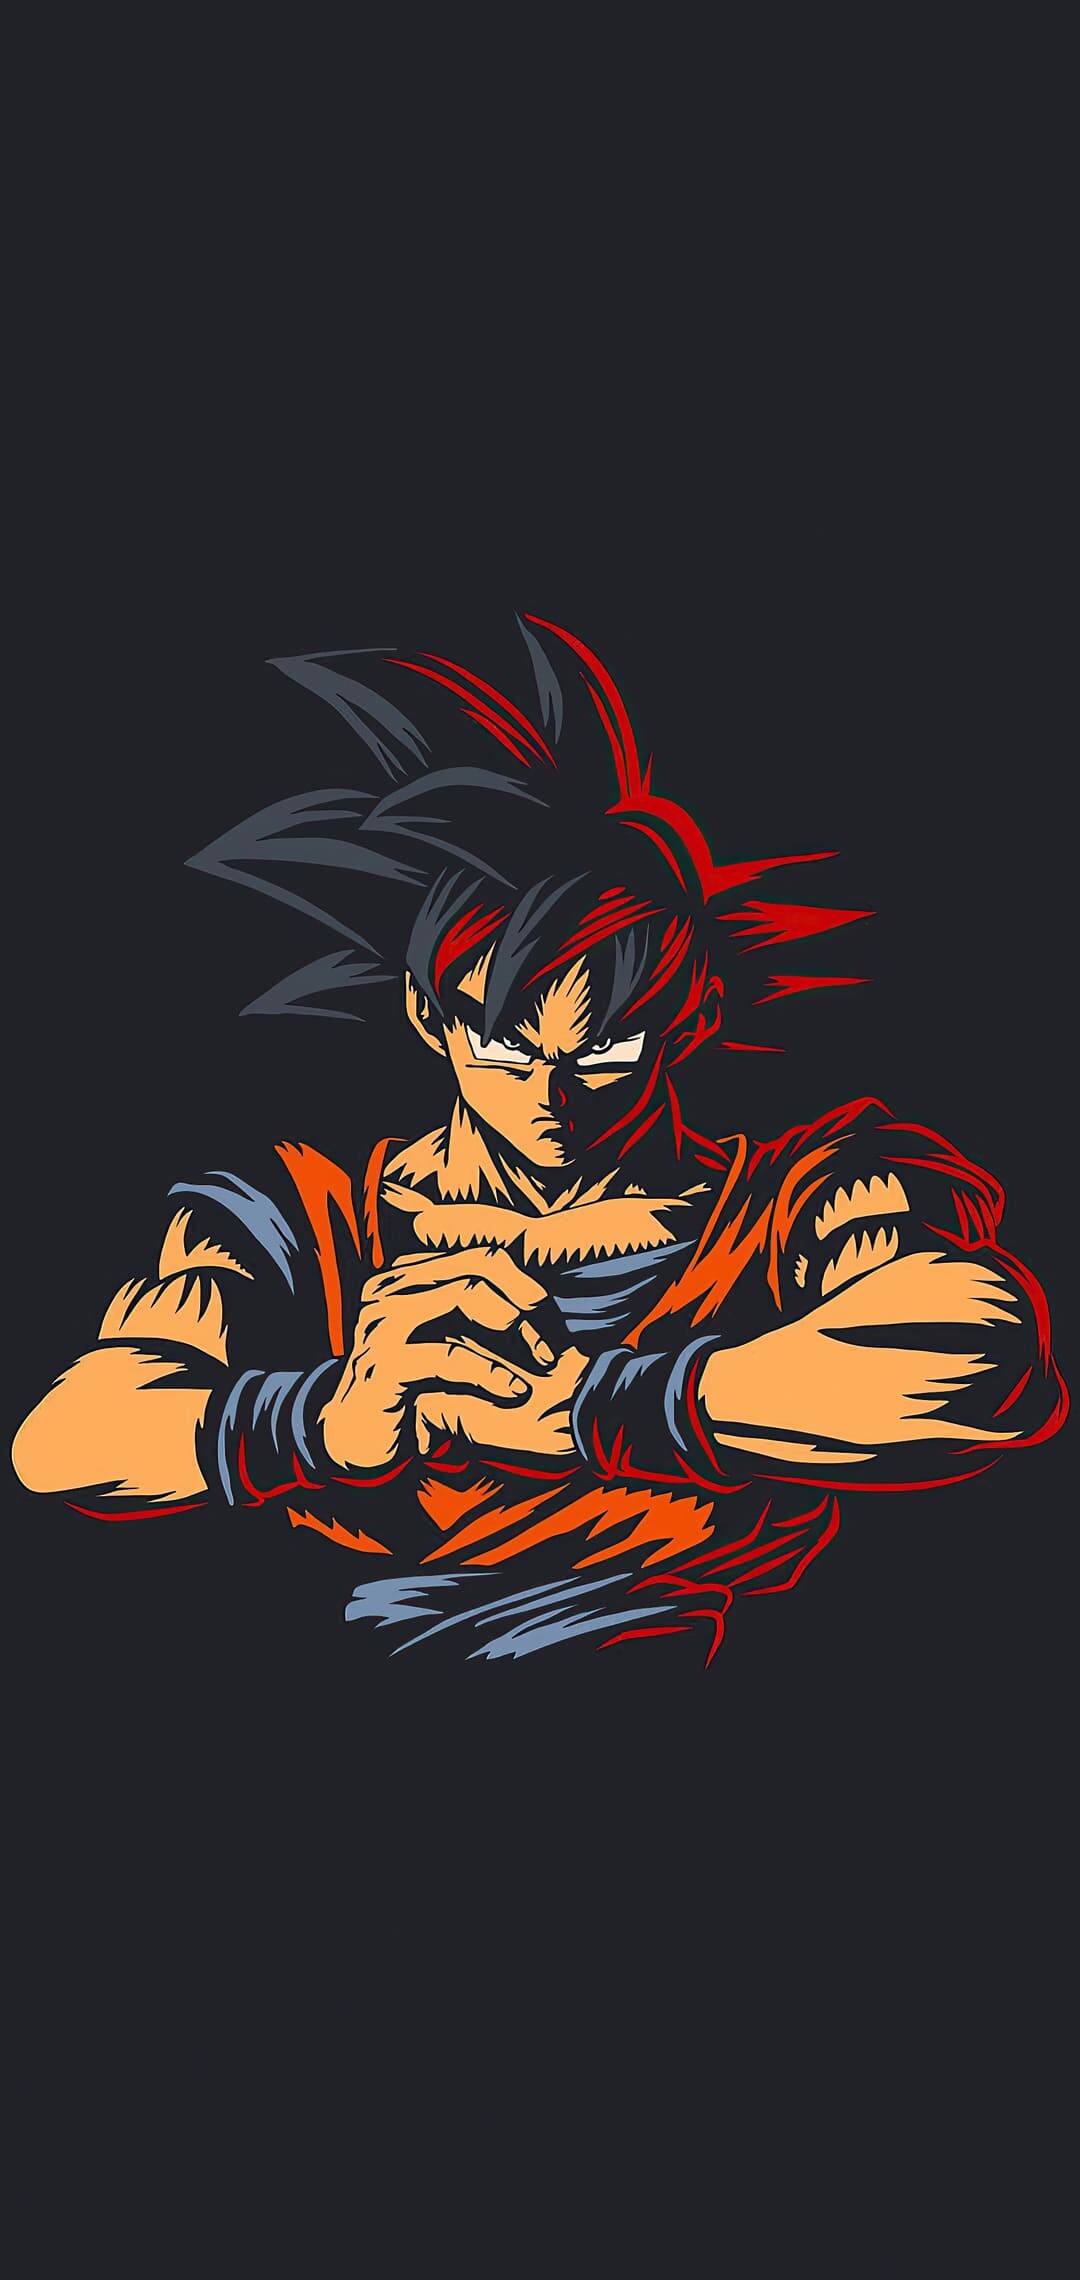 Goku: A boy with superhuman strength, The Earth's mightiest warrior, Anime characters, Dragon Ball. 1080x2280 HD Background.